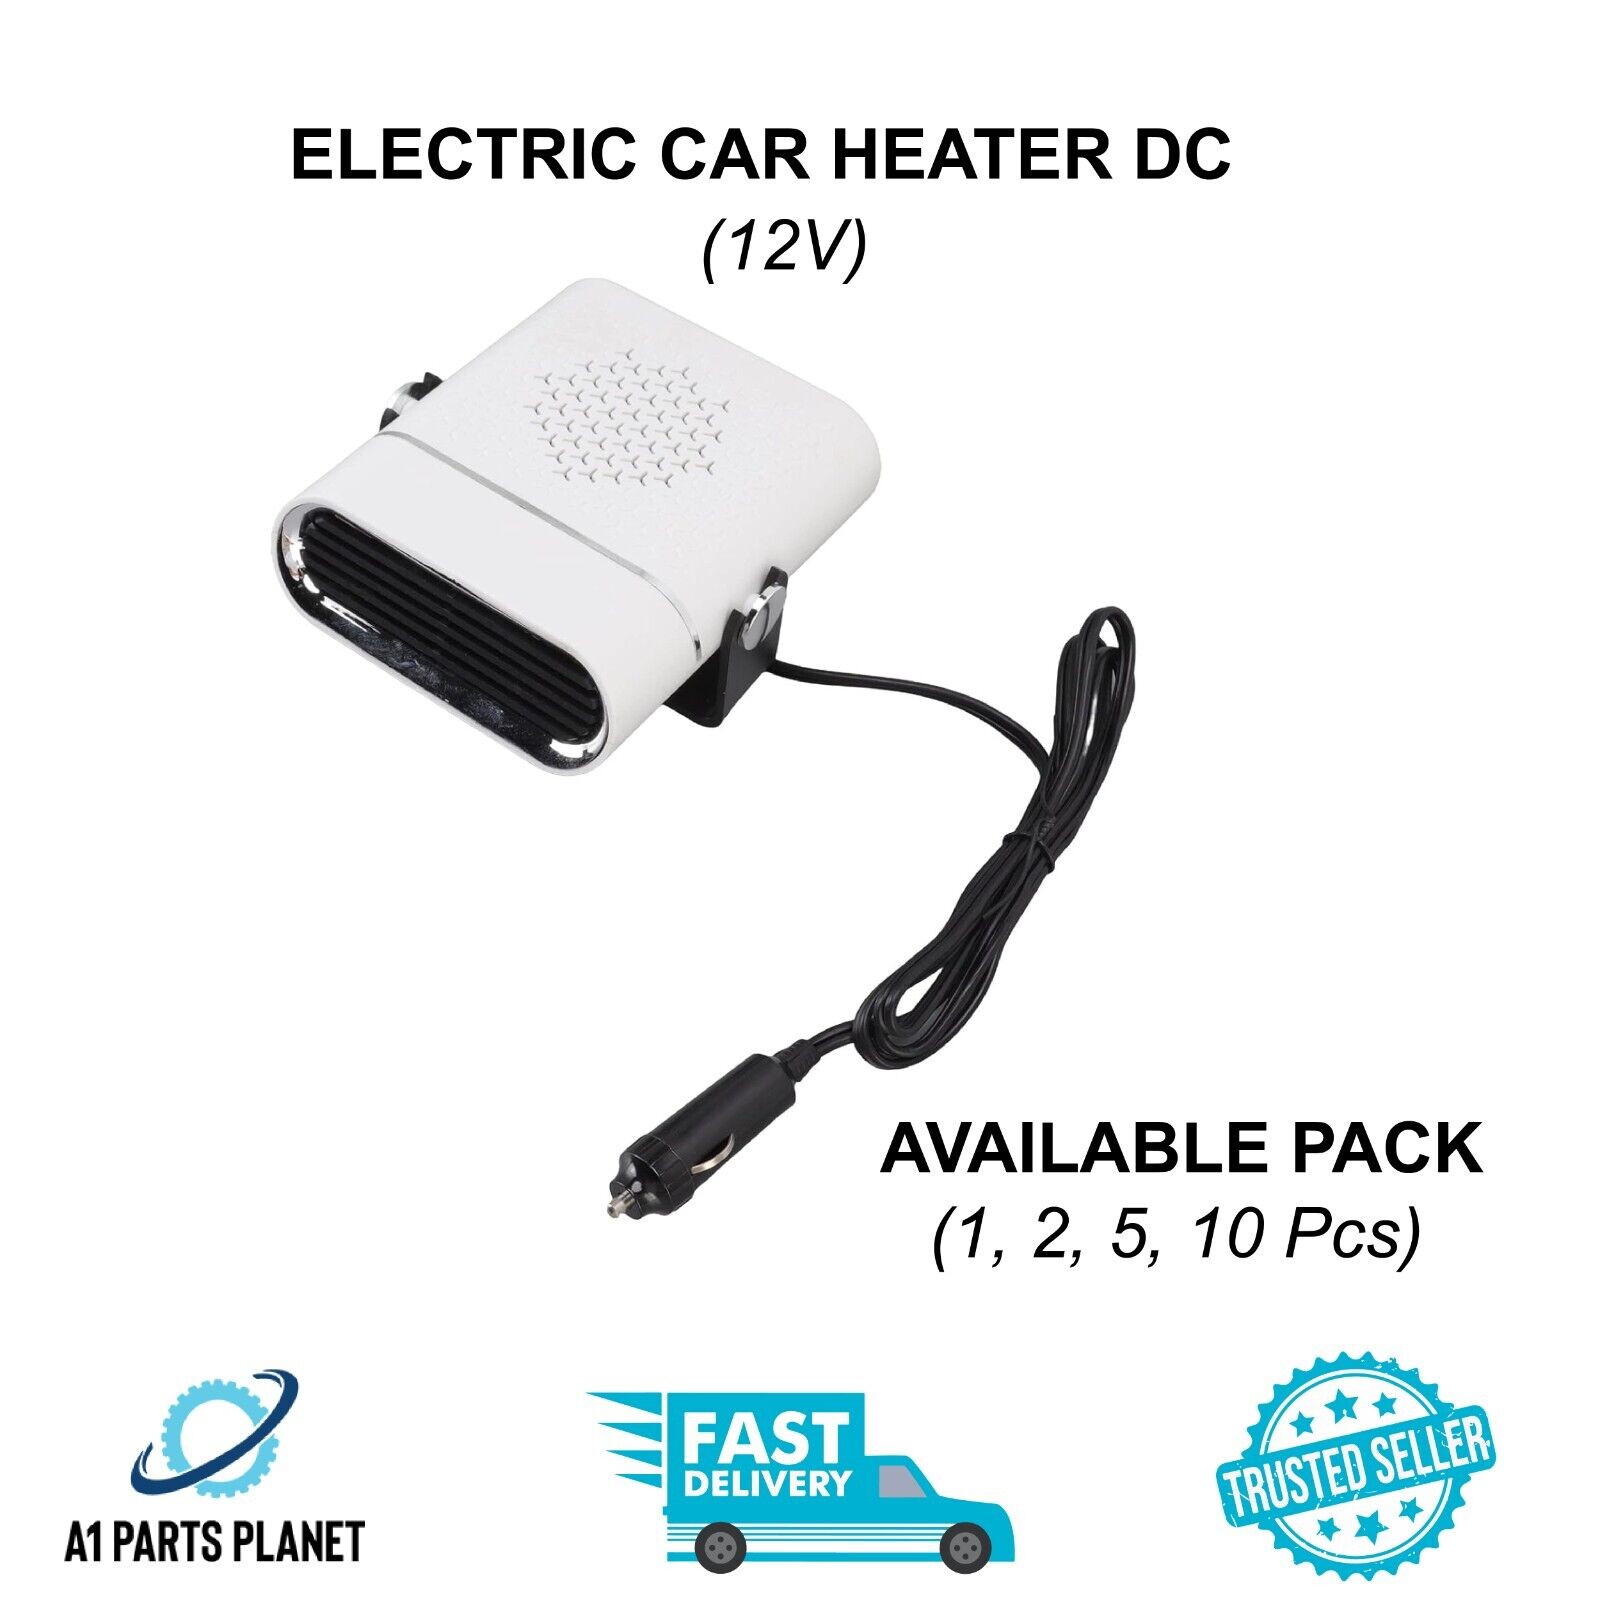 150W Car Heater Portable Electric Heating Defogger Defroster Demister White